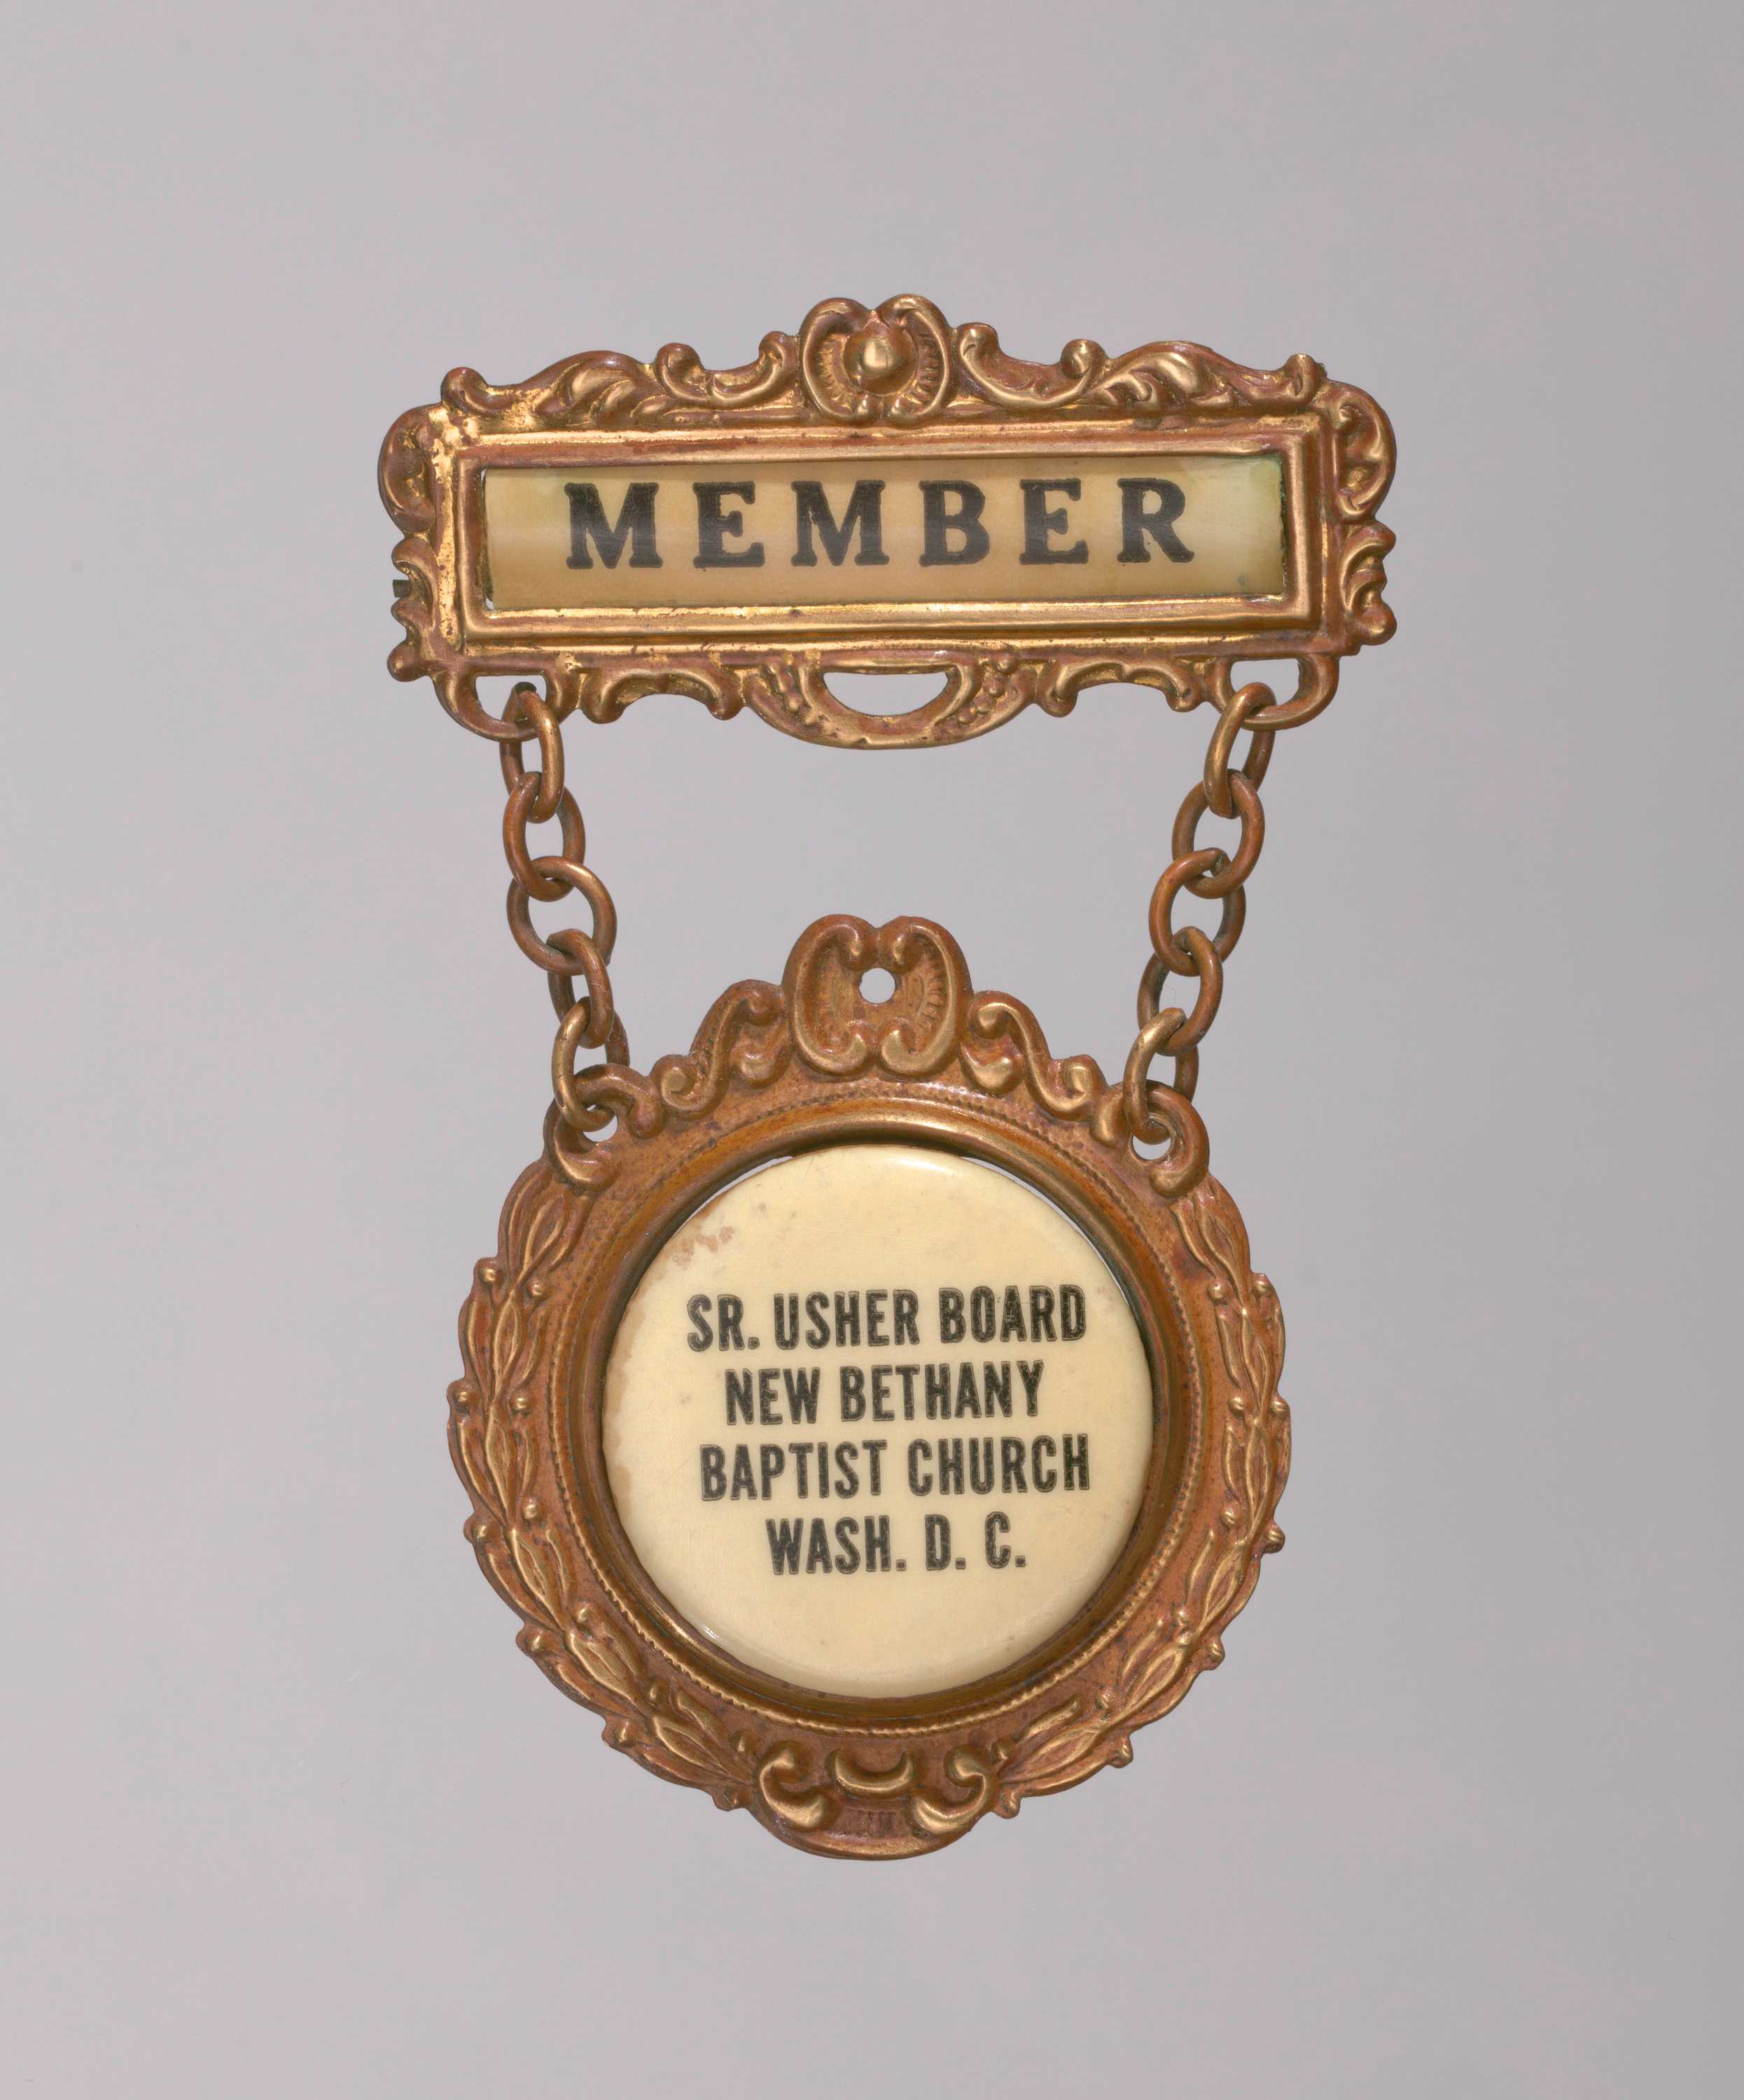 This is a faux gold usher badge was worn by Ruby Penn, a onetime member on the usher board at New Bethany Baptist Church in Washington, D.C.